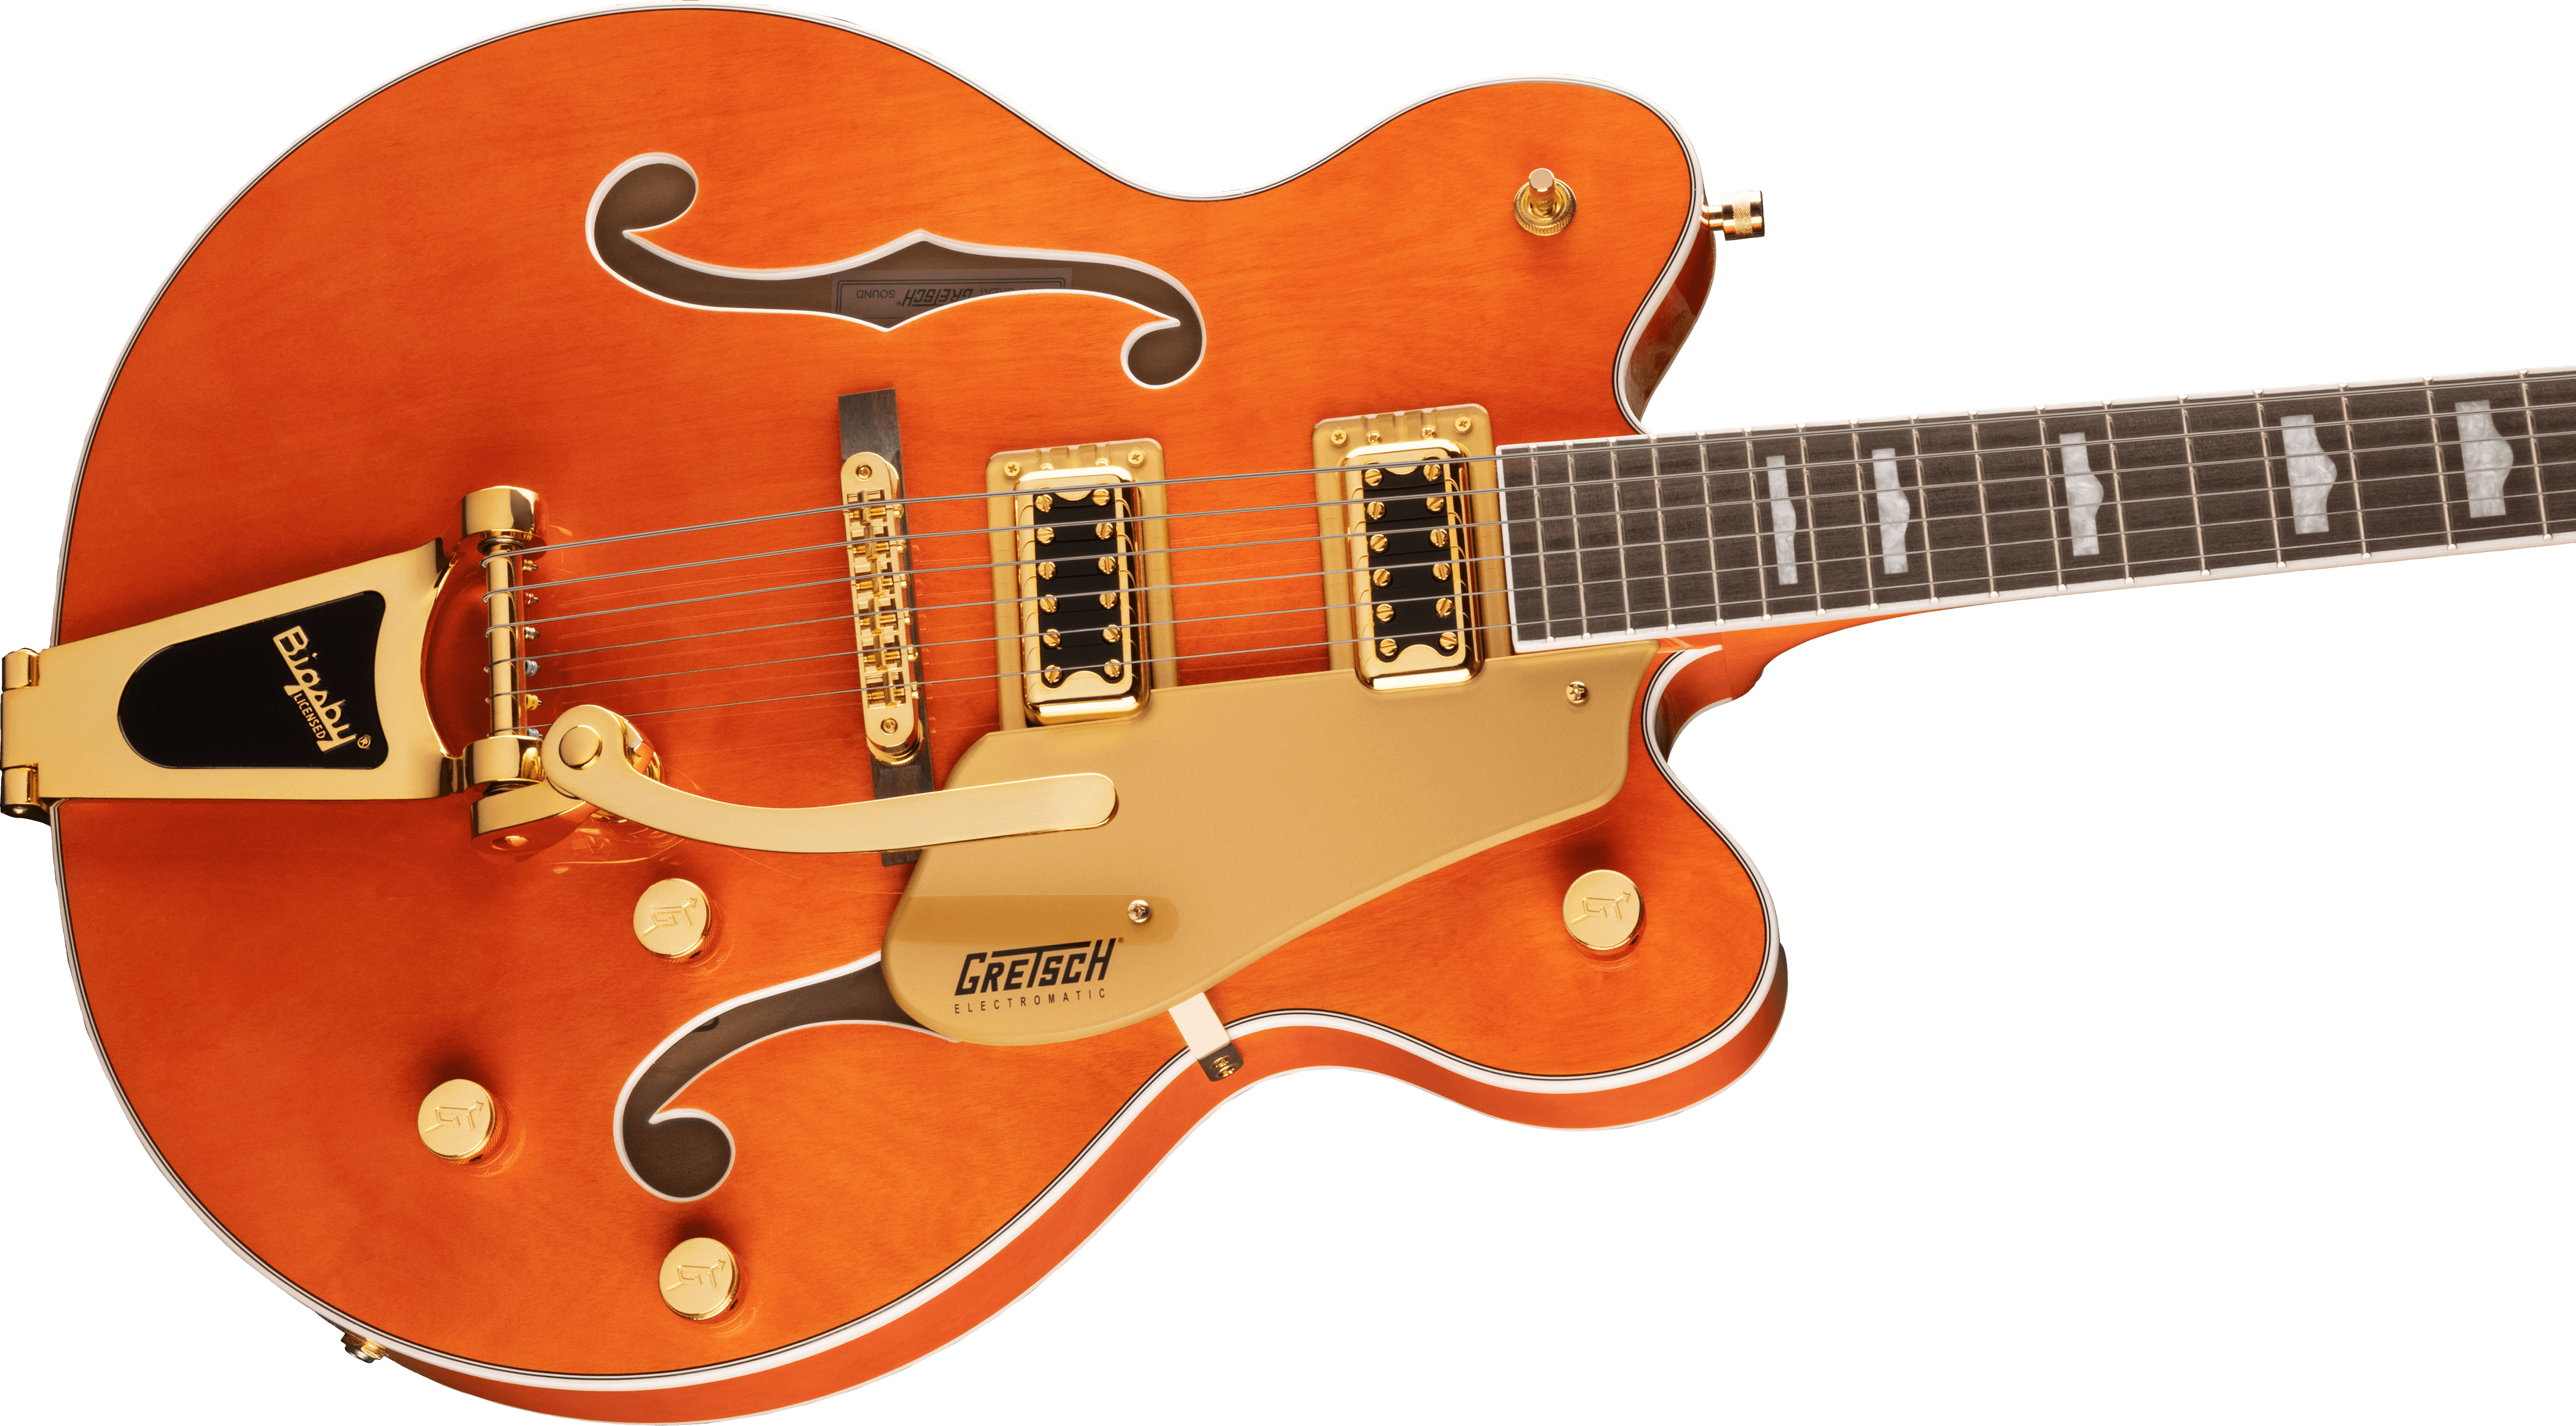 Gretsch G5422TG Electromatic Classic Hollowbody Double Cut Electric Guitar - Orange Stain